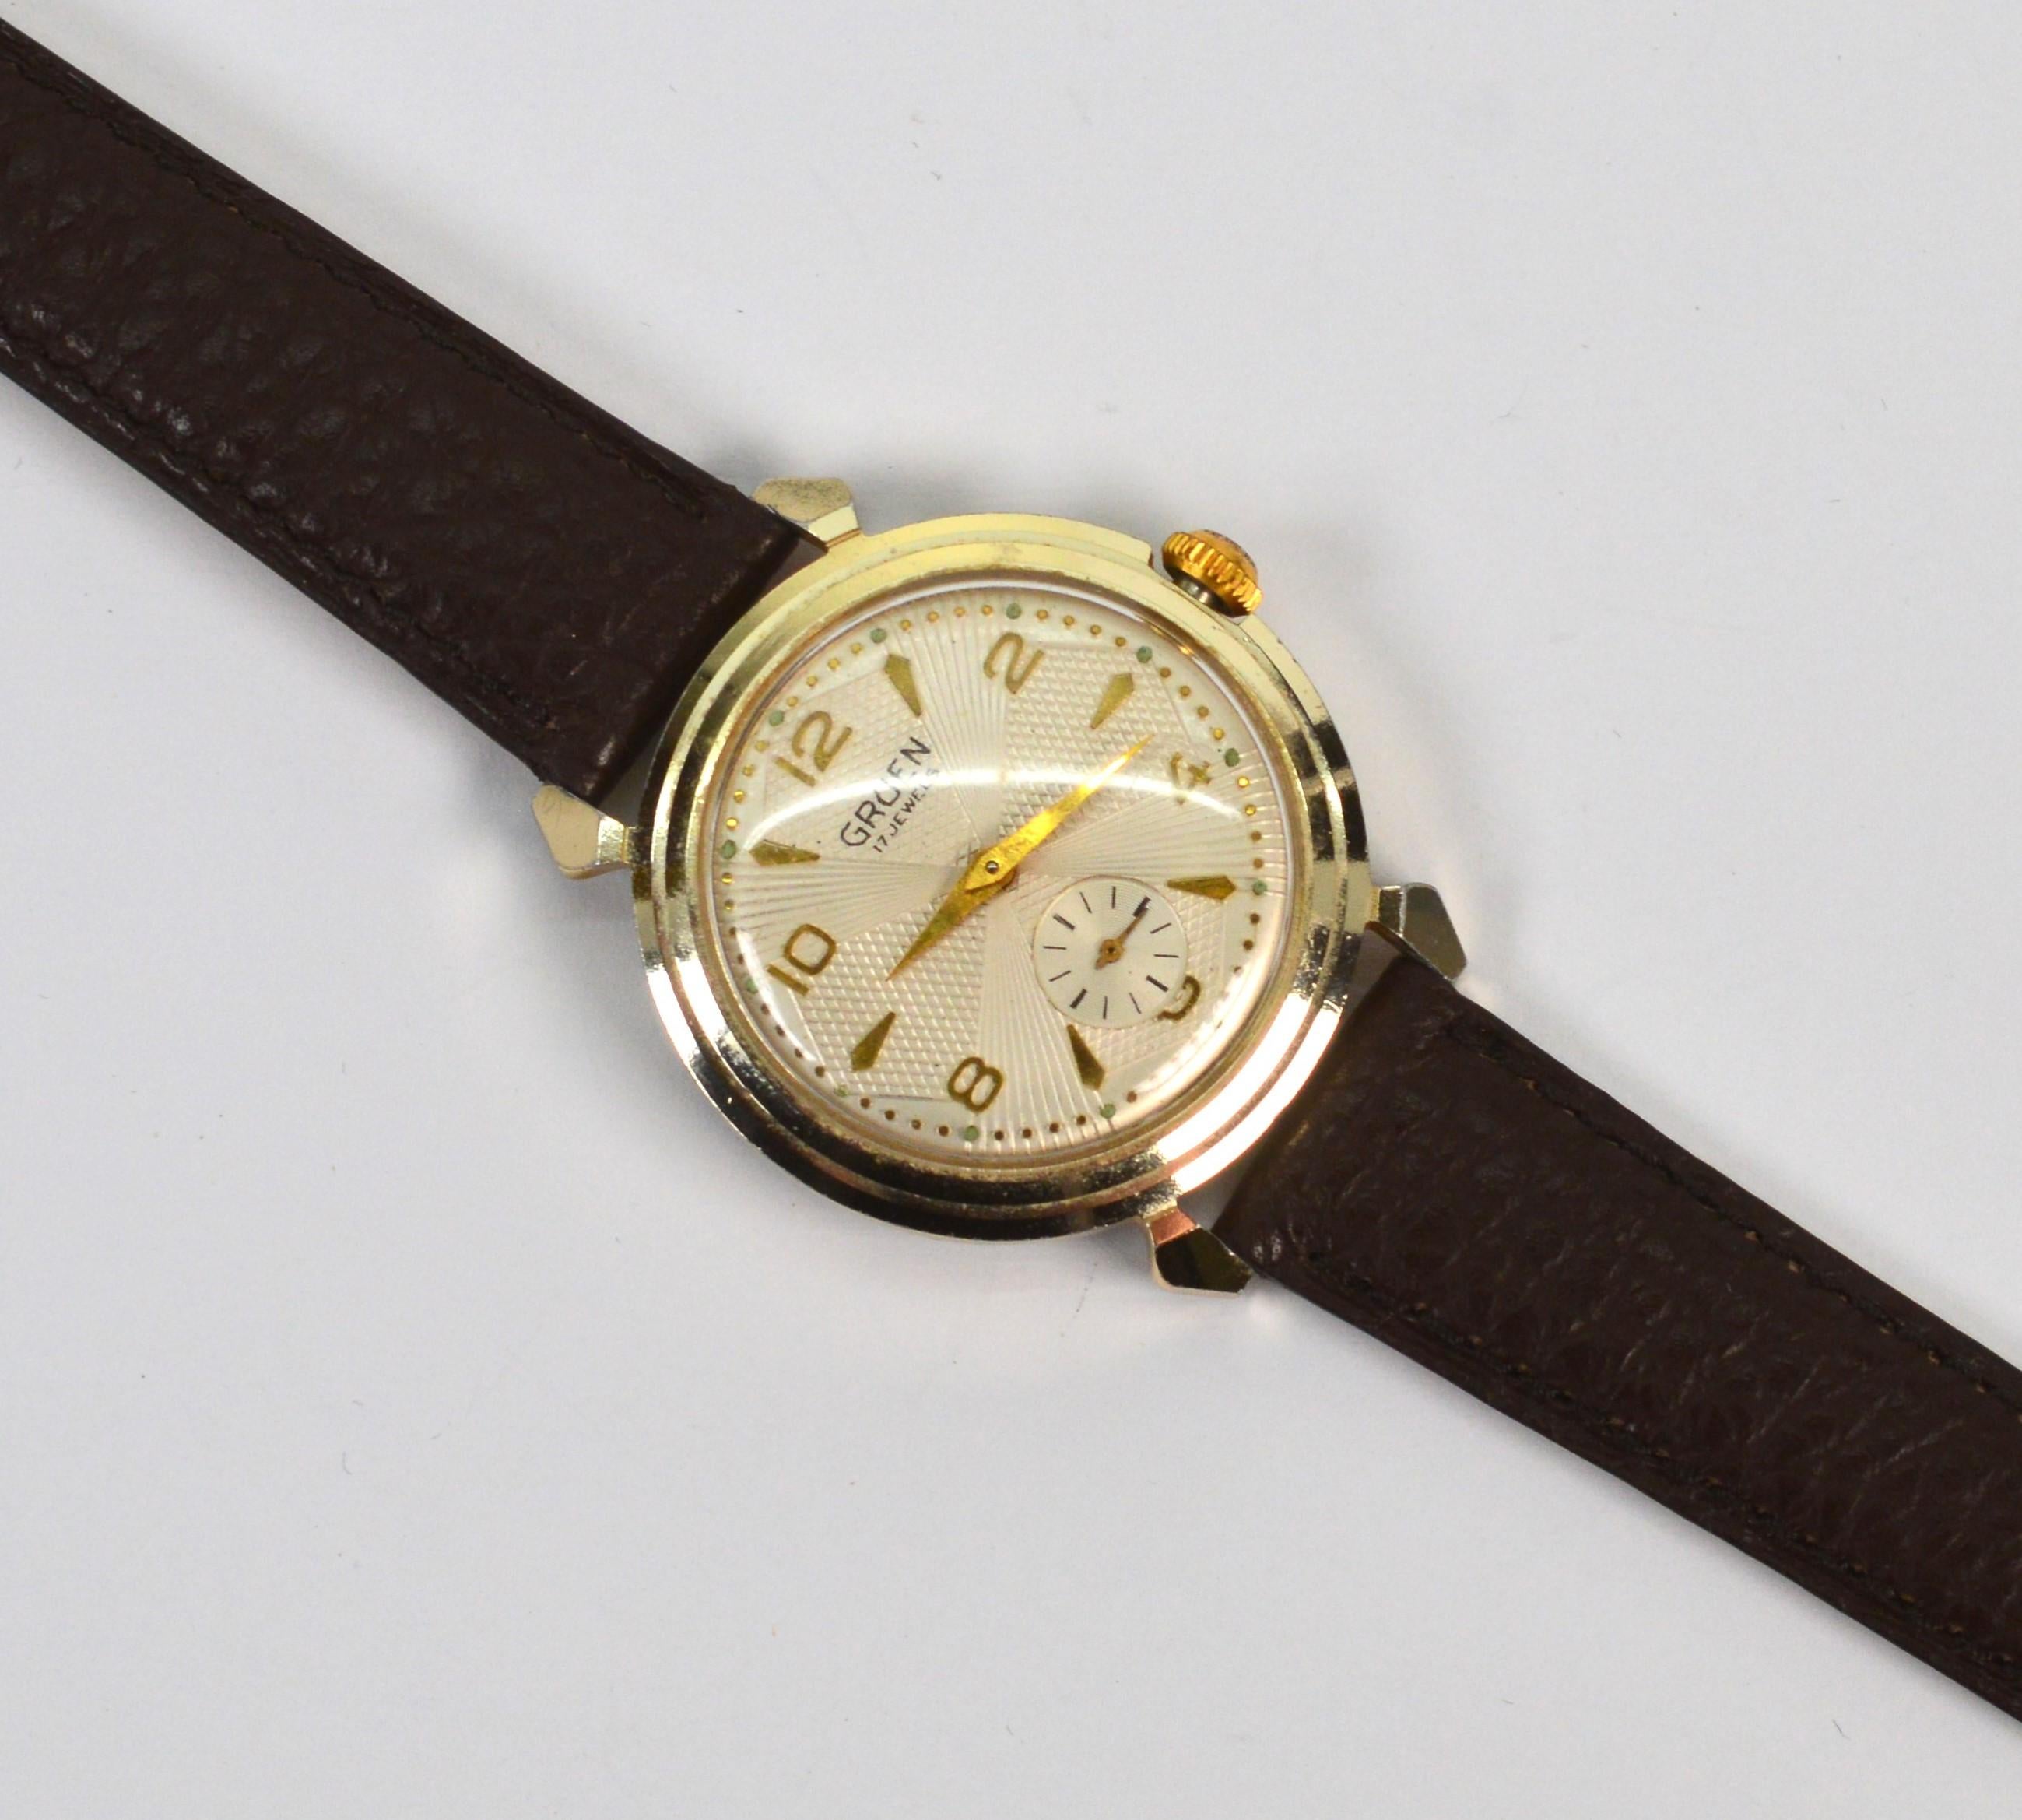 Rare Gruen 416 Swiss Men's Wrist Watch In Excellent Condition For Sale In Mount Kisco, NY